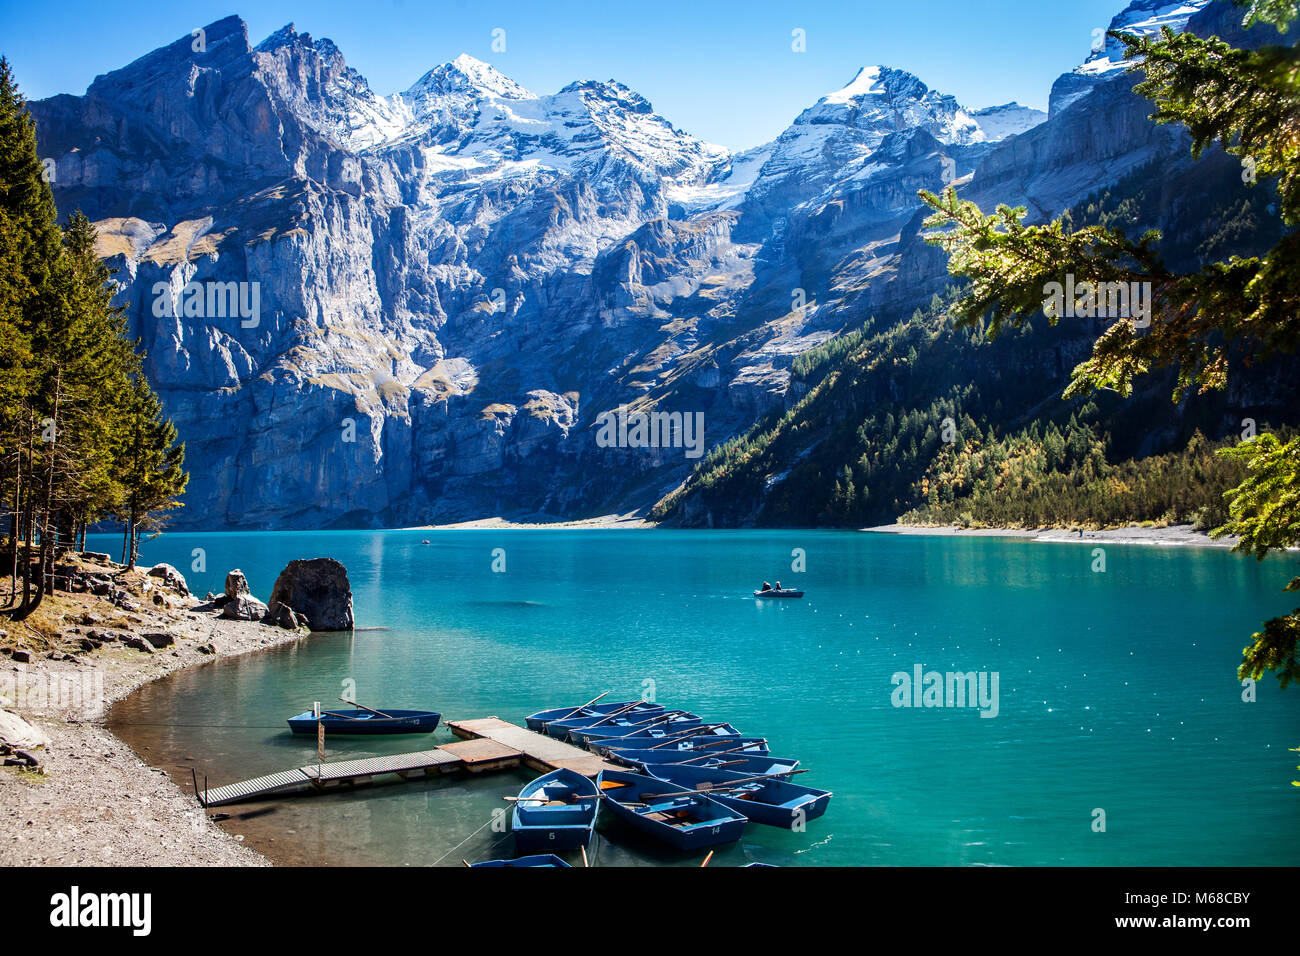 scenic view of famous mountain lake oeschinensee in switzerland kandersteg late summer in the alps with snow covered mountain peaks Stock Photo